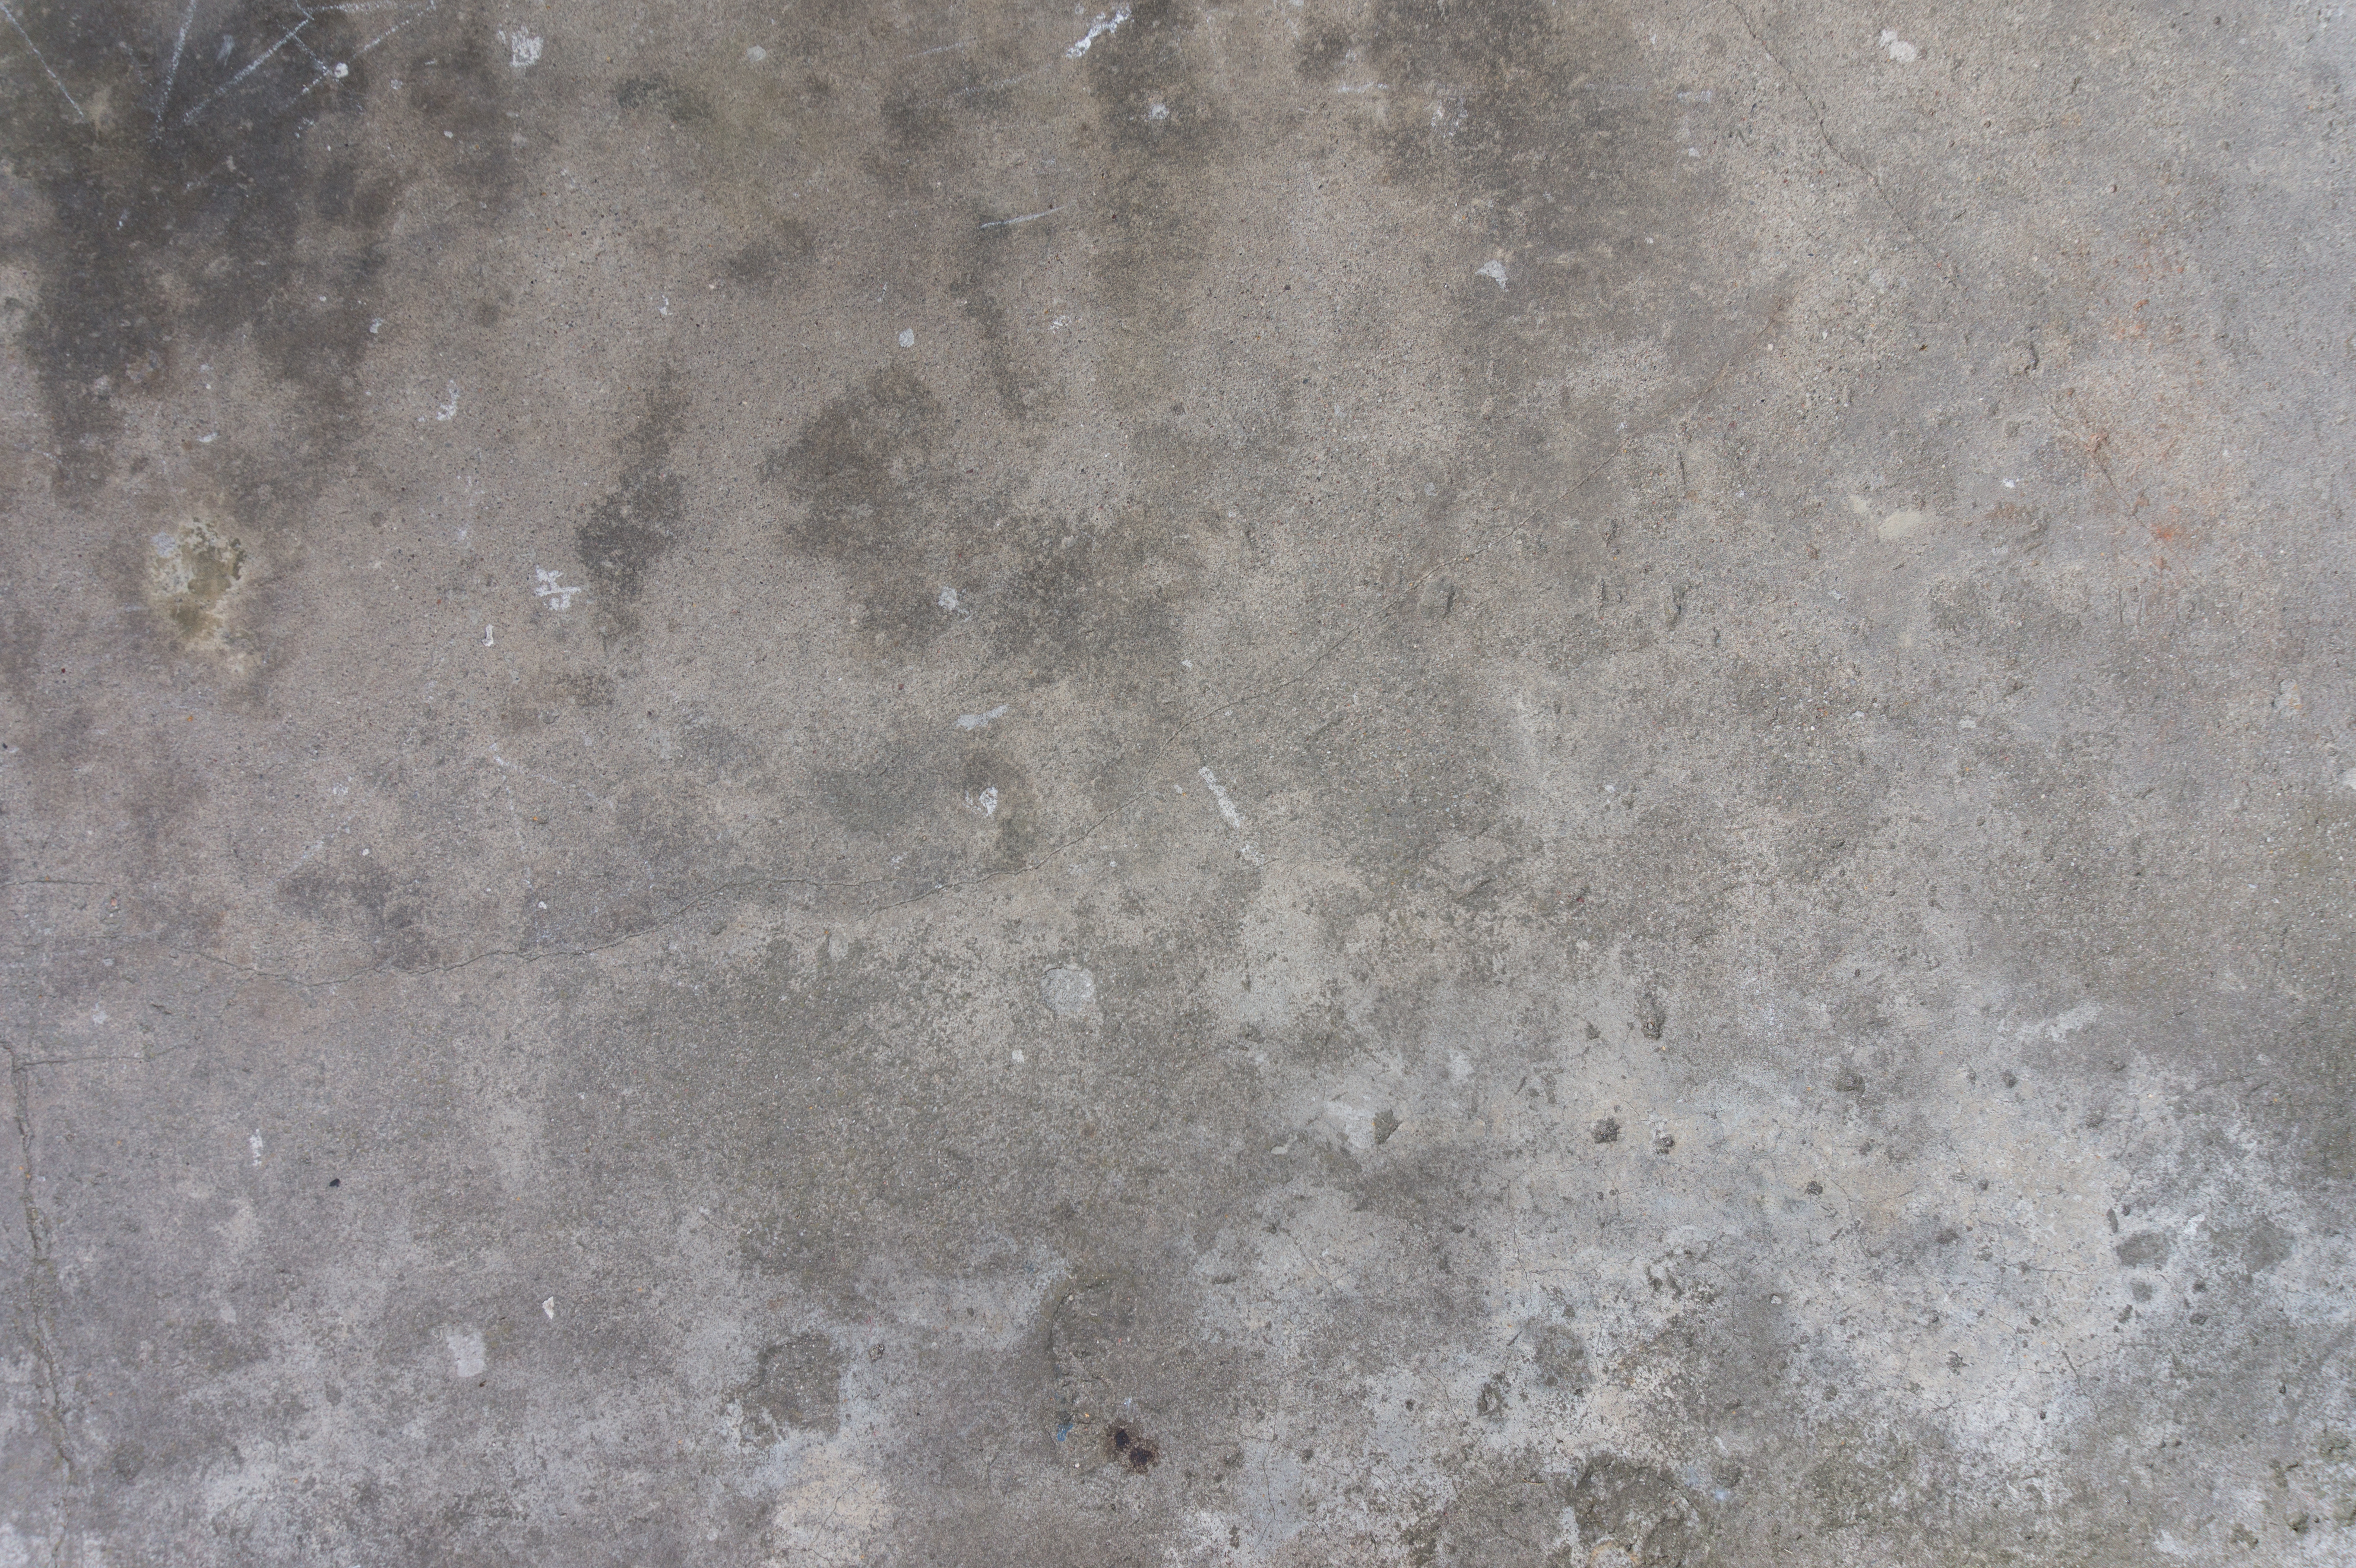 Dirty concrete wall covered with stains - Concrete ...